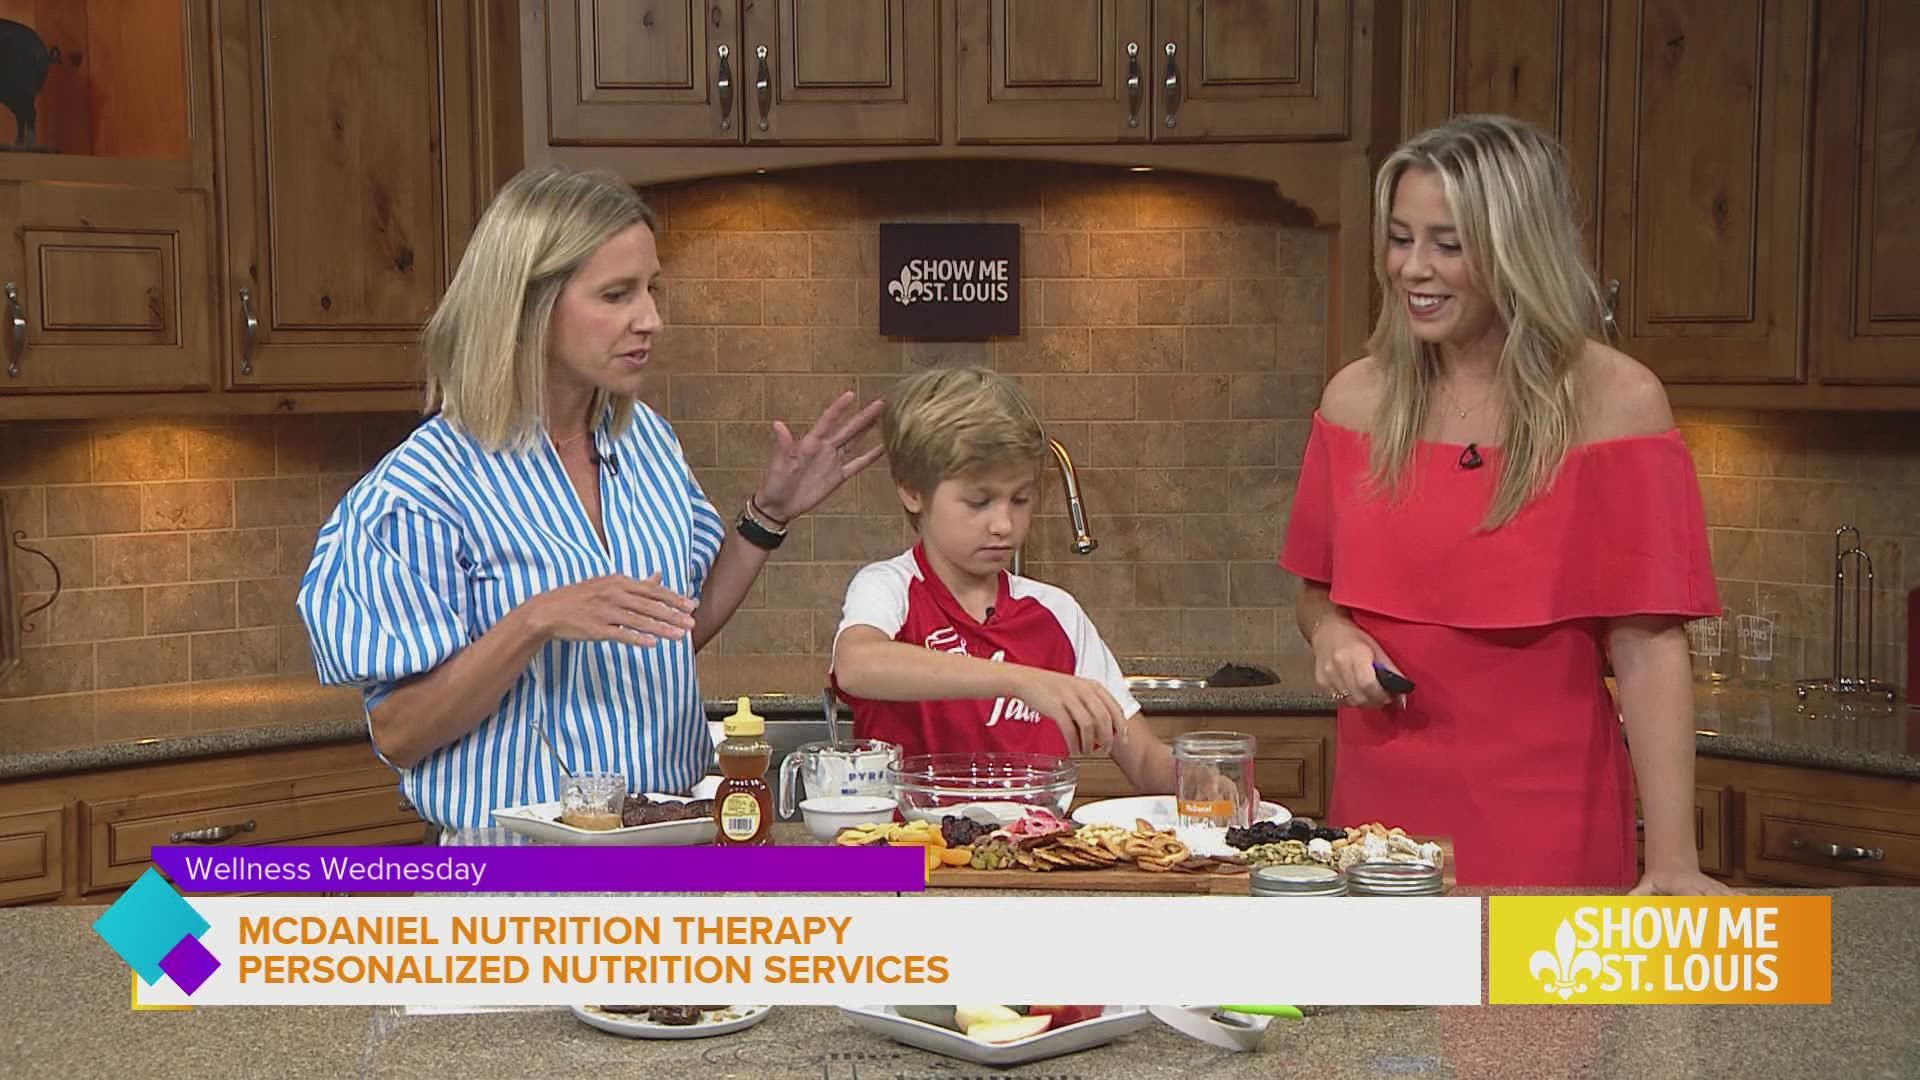 Owner of McDaniel Nutrition Therapy, Jennifer McDaniel, along with her son, Chef Jack stopped by the Show Me kitchen to share their favorite after school snacks.